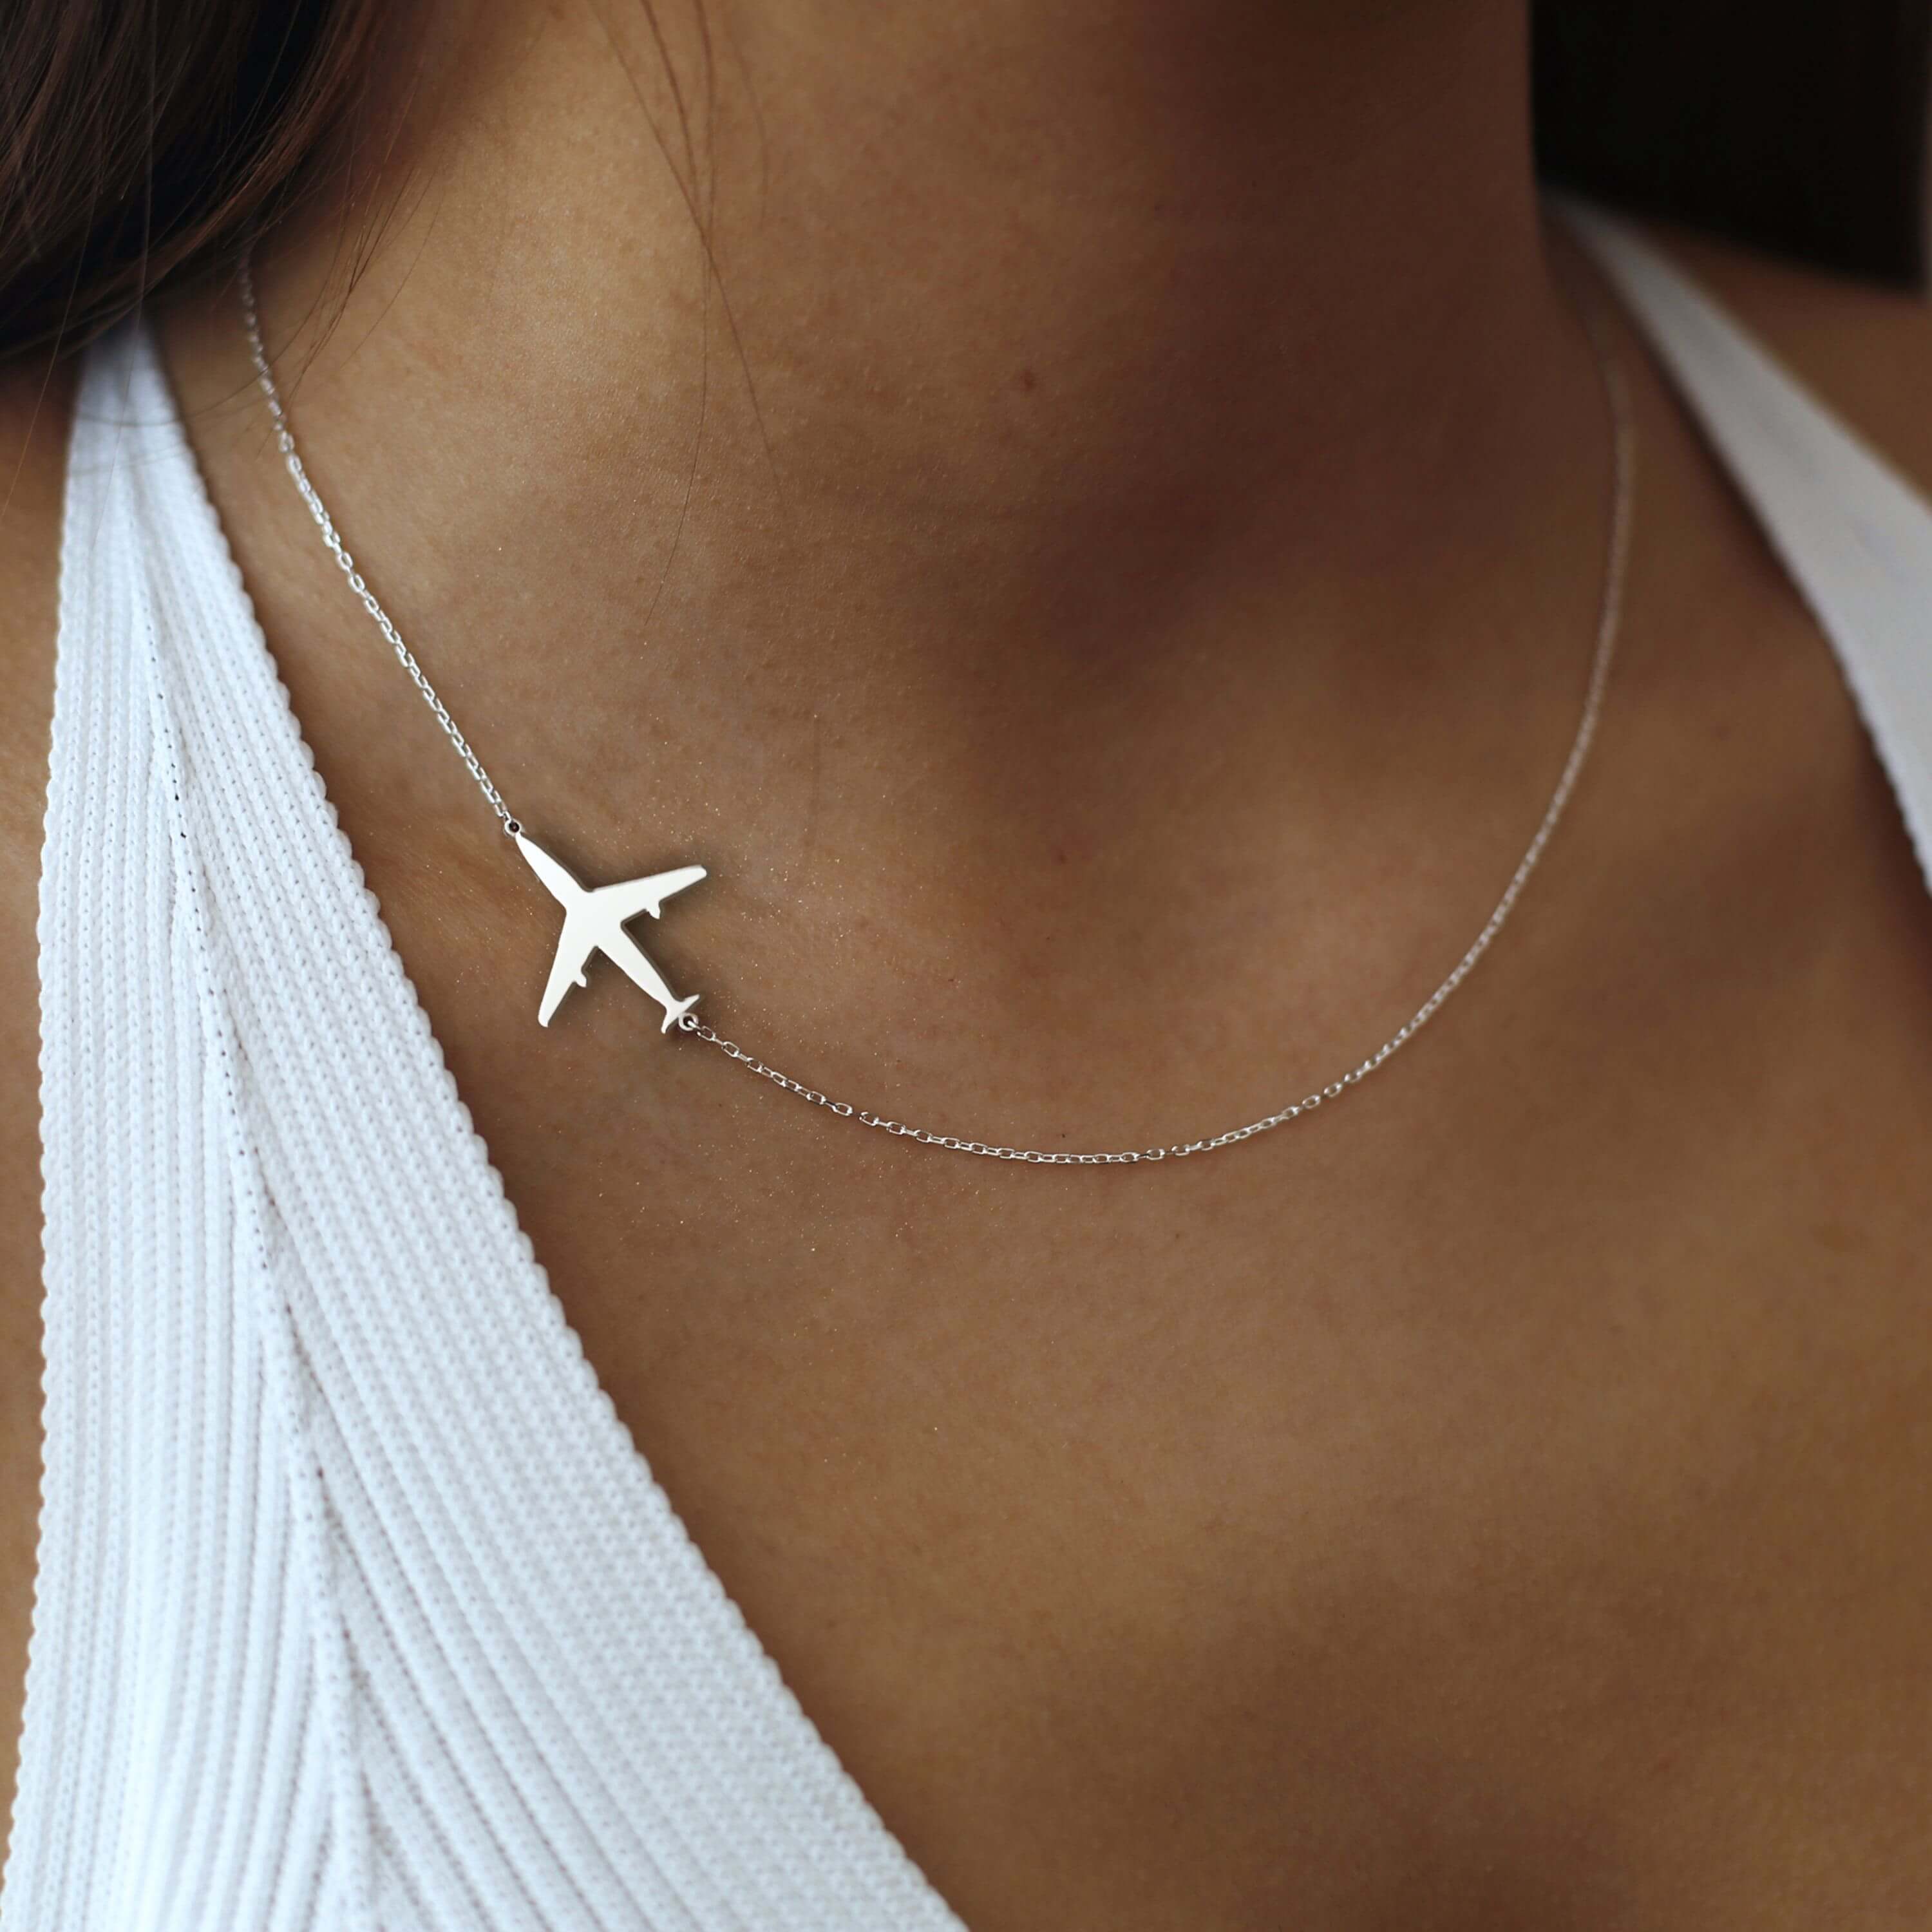 Travel Inspired Golden or Silver Airplane Wanderlust Necklace